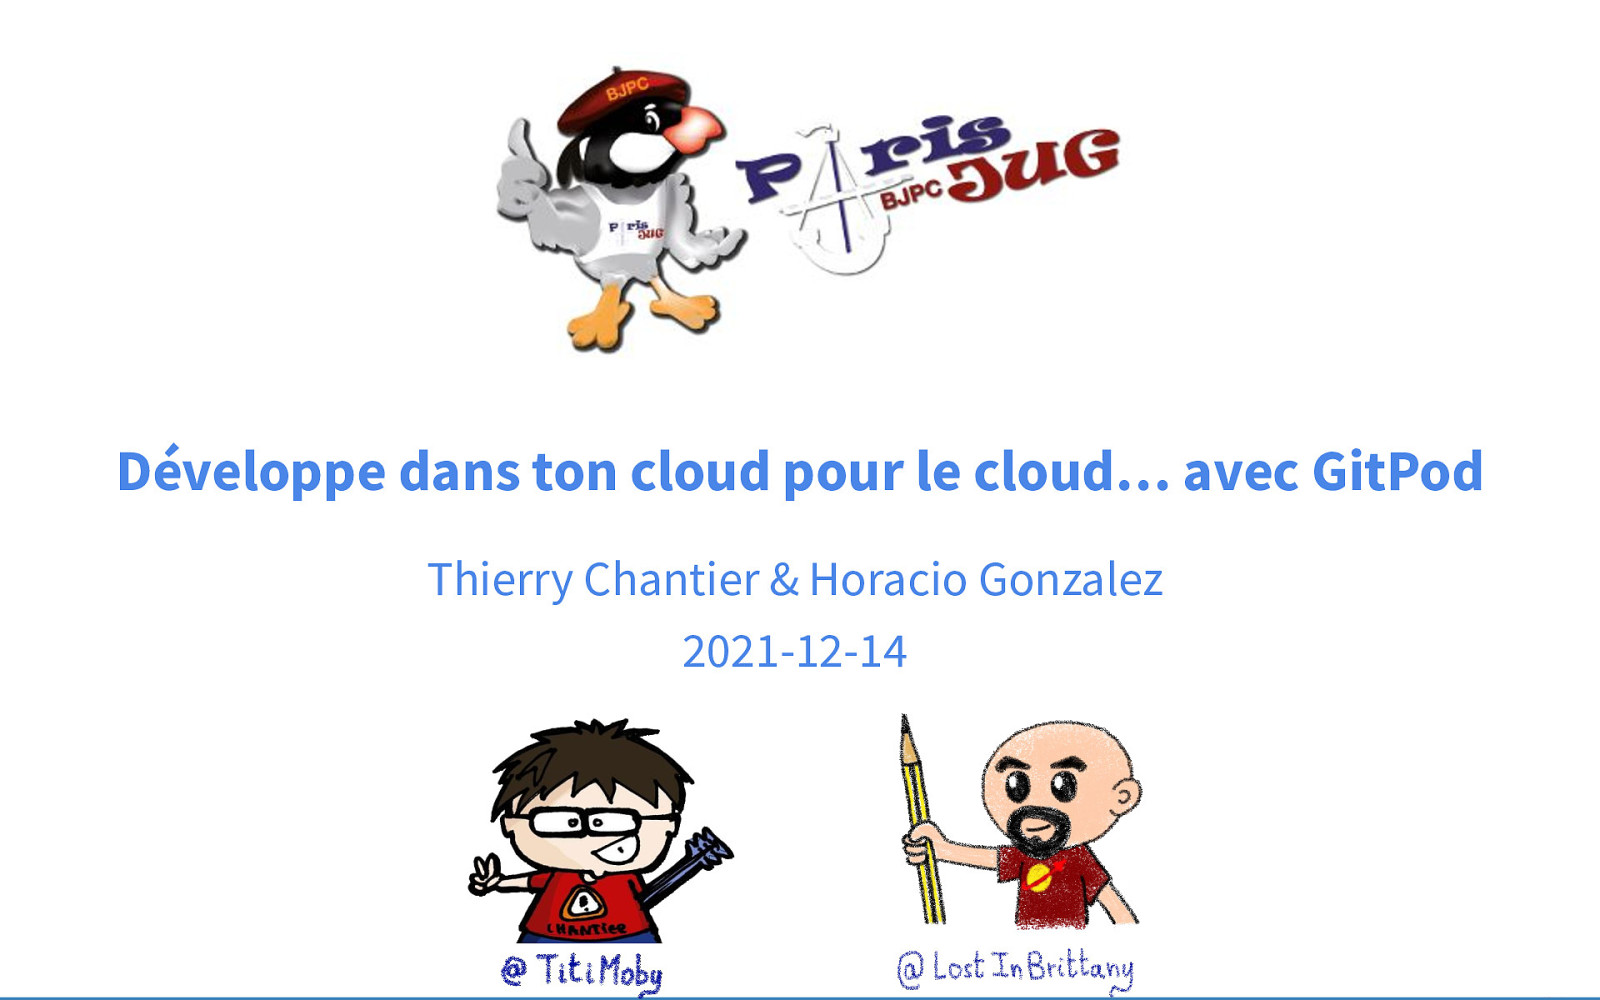 Developing for the cloud… in the cloud… with GitPod!